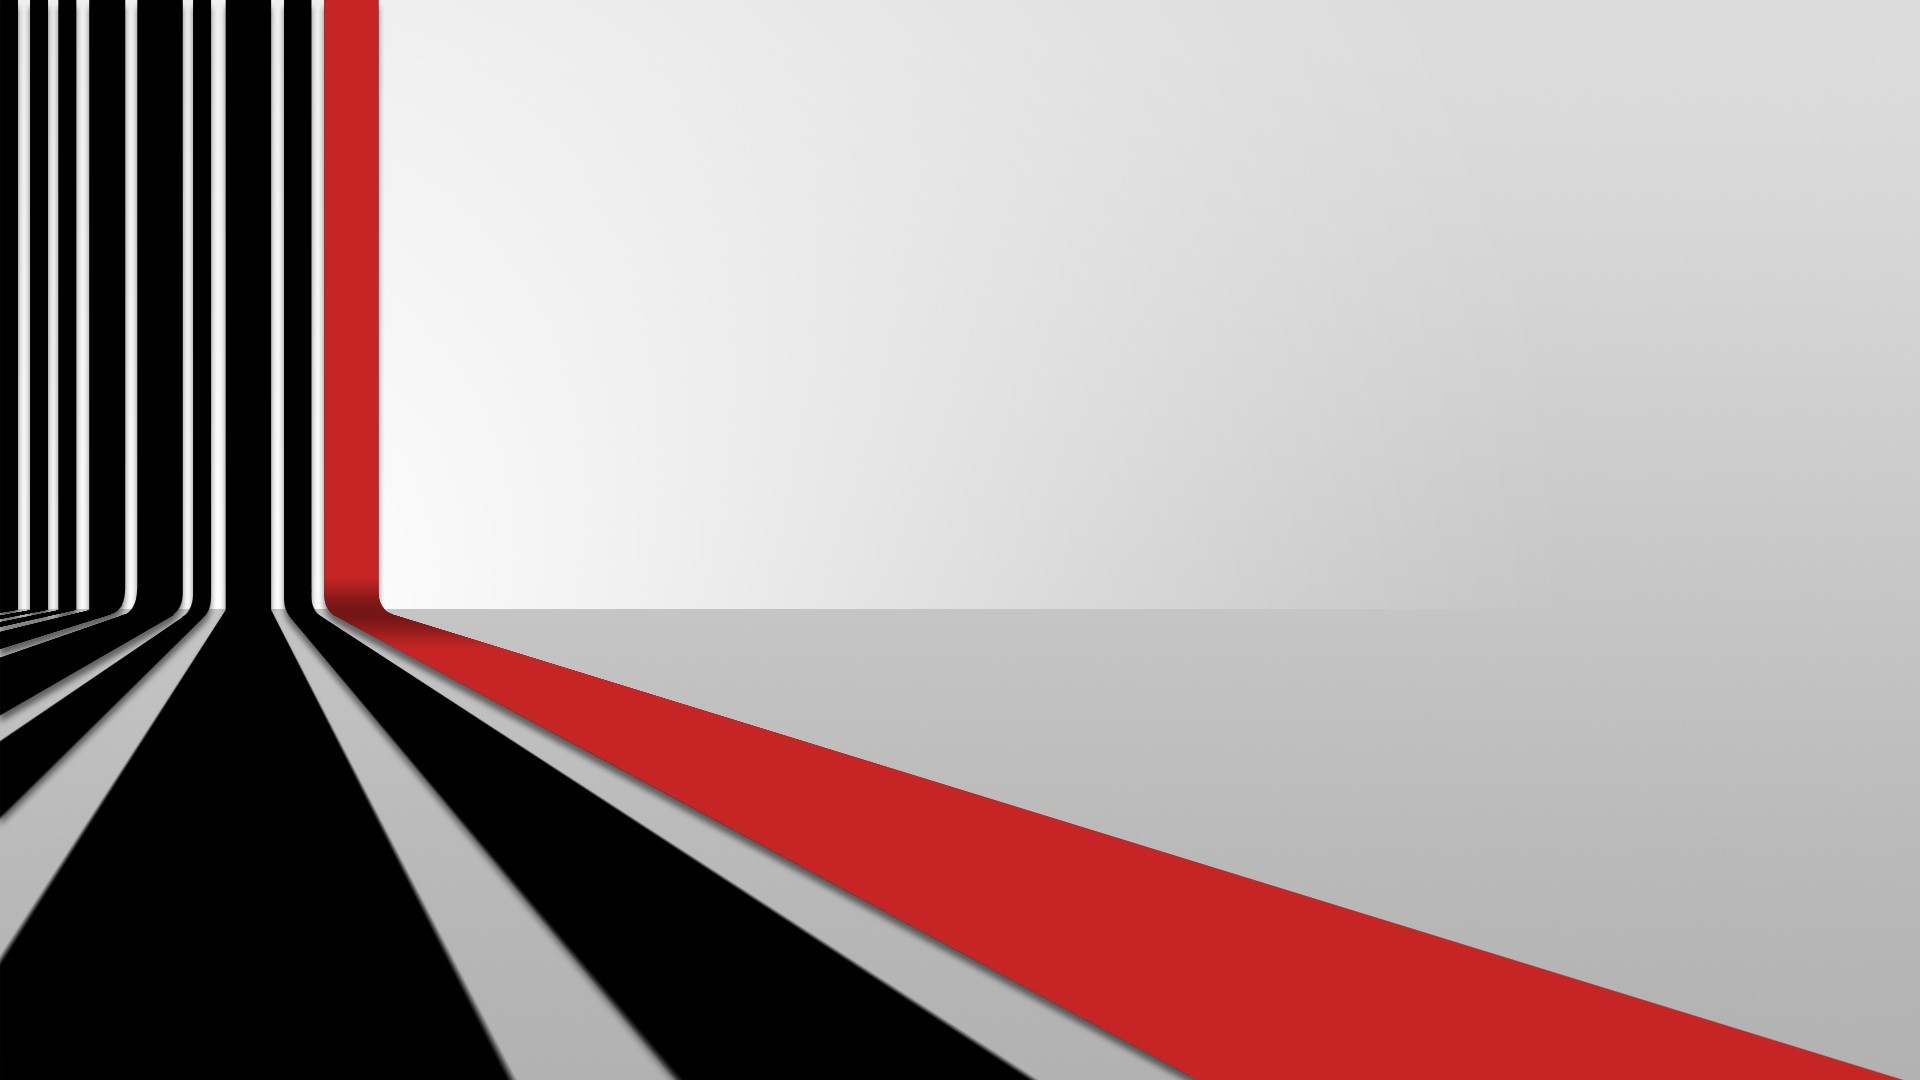 General 1920x1080 simple background artwork lines abstract white red black minimalism selective coloring digital art